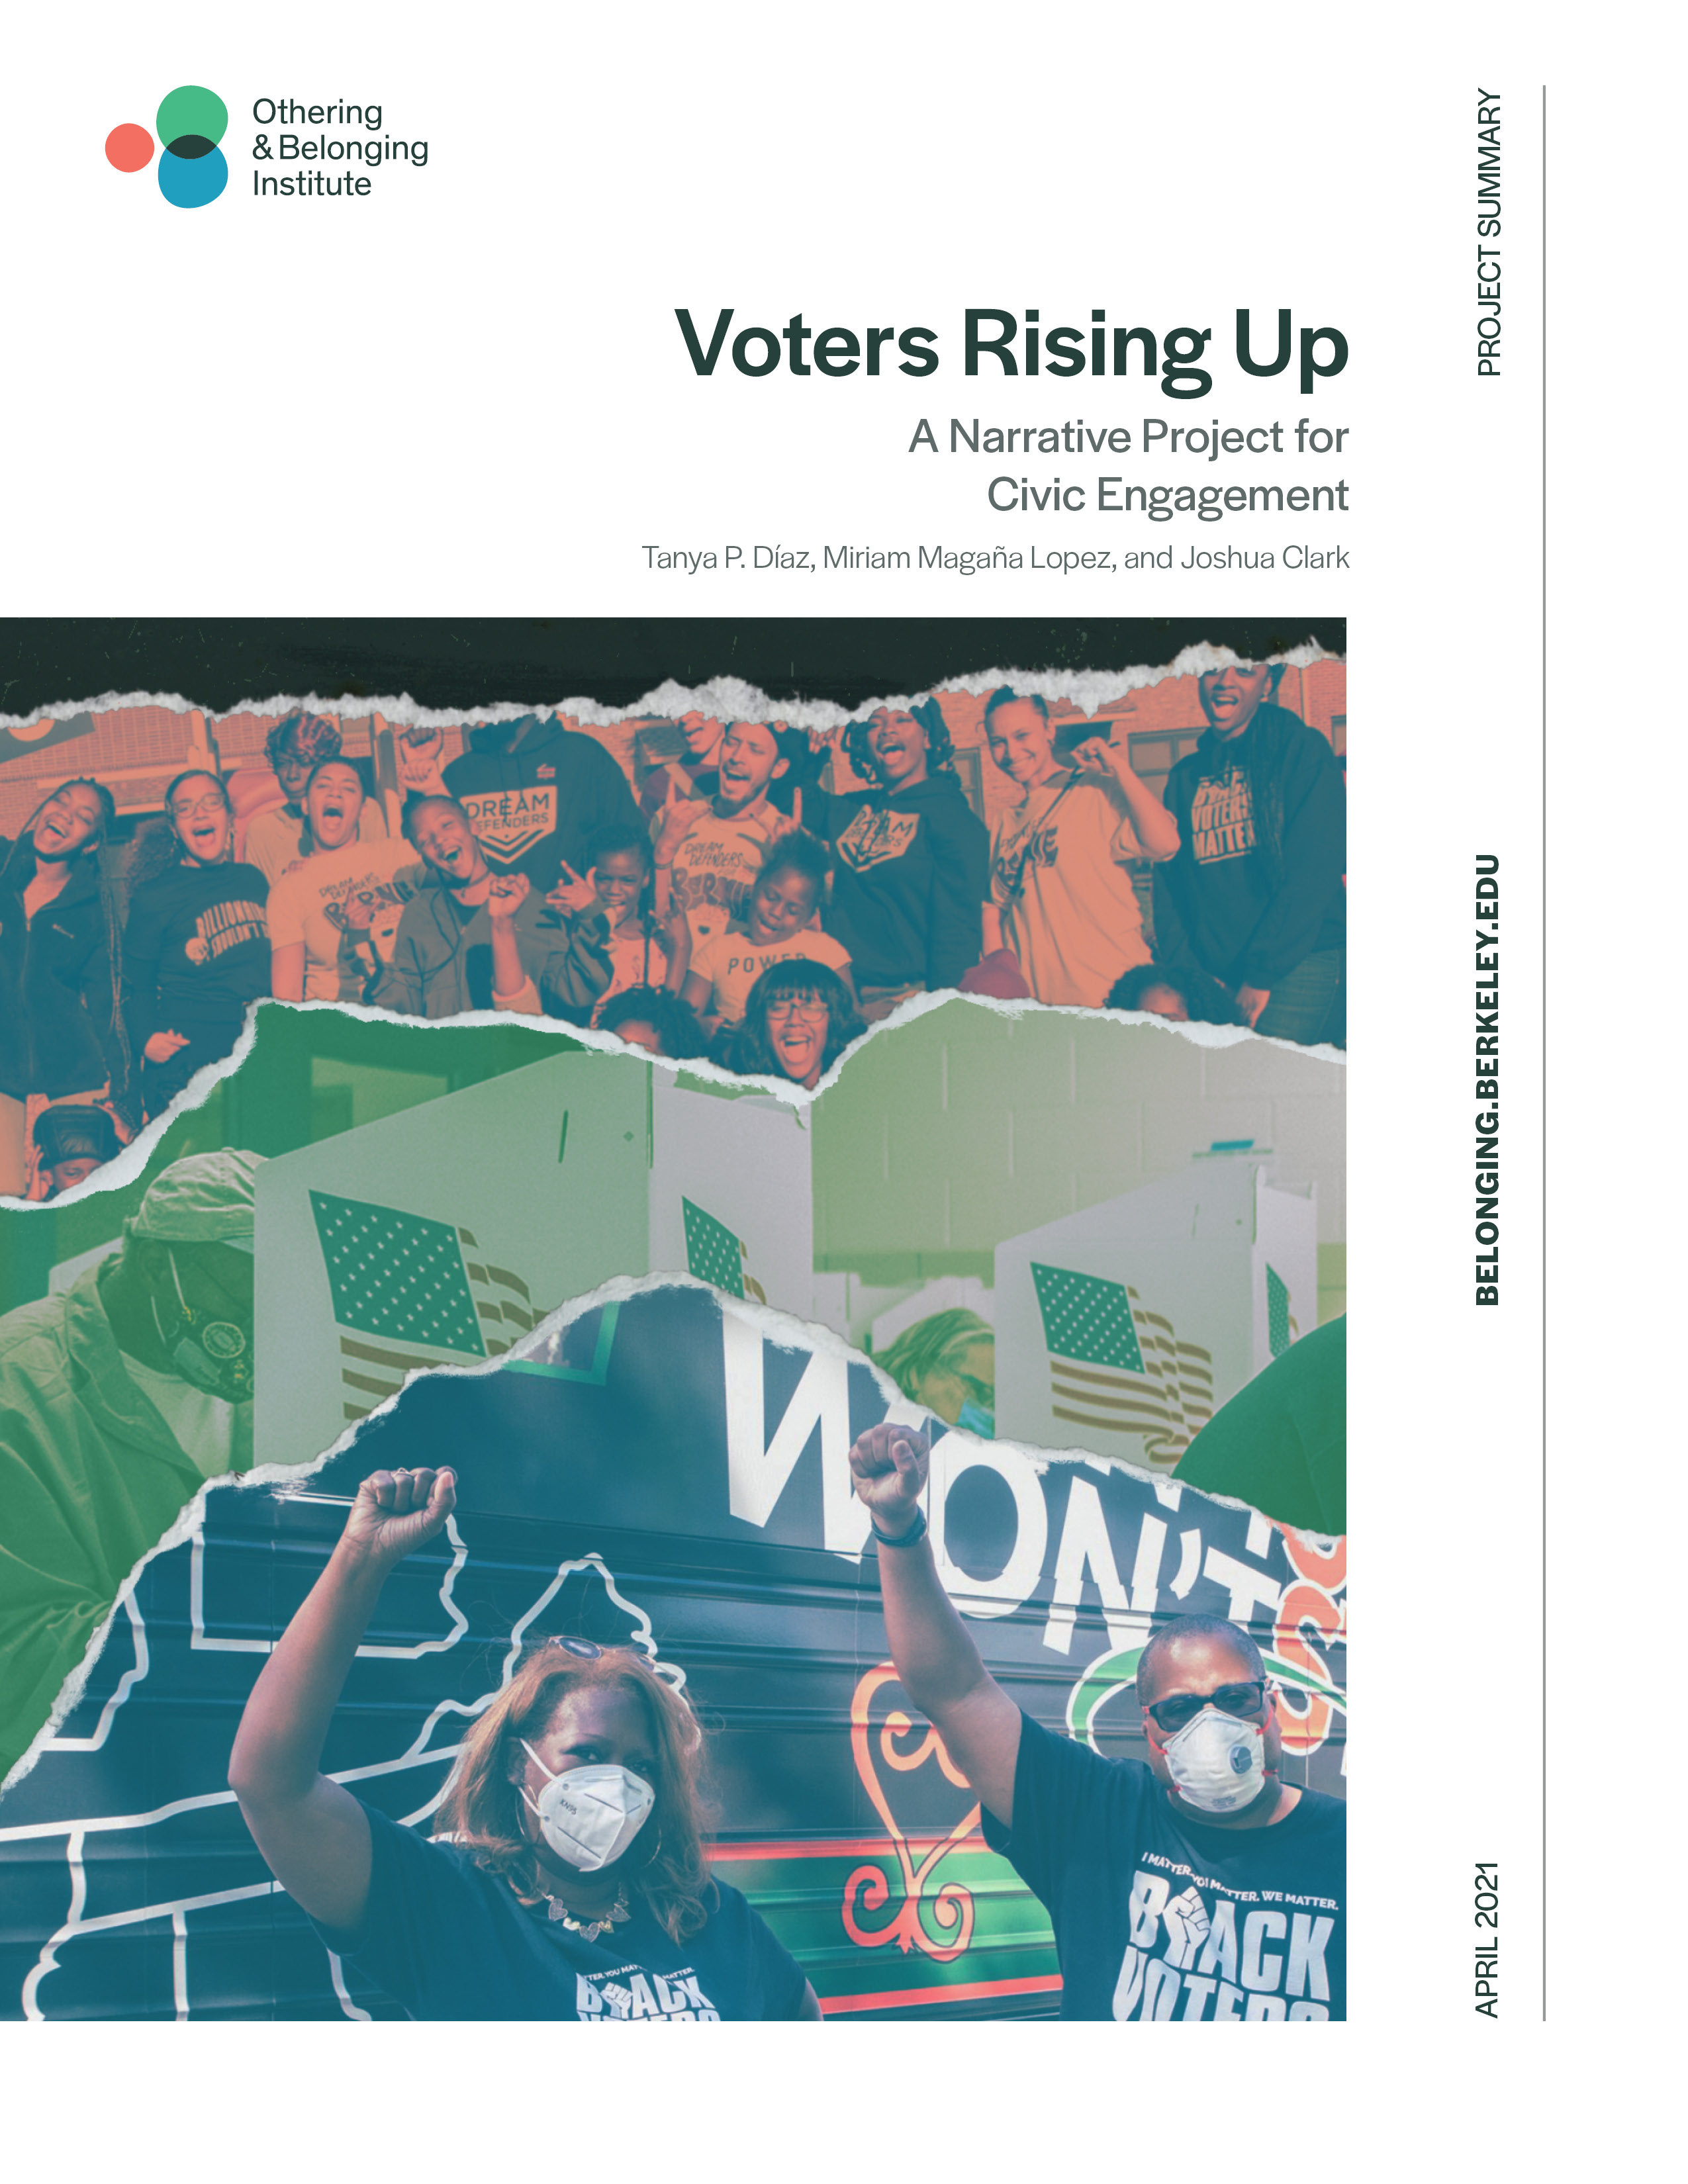 cover of the report featuring a collage of voters and voting rights activists